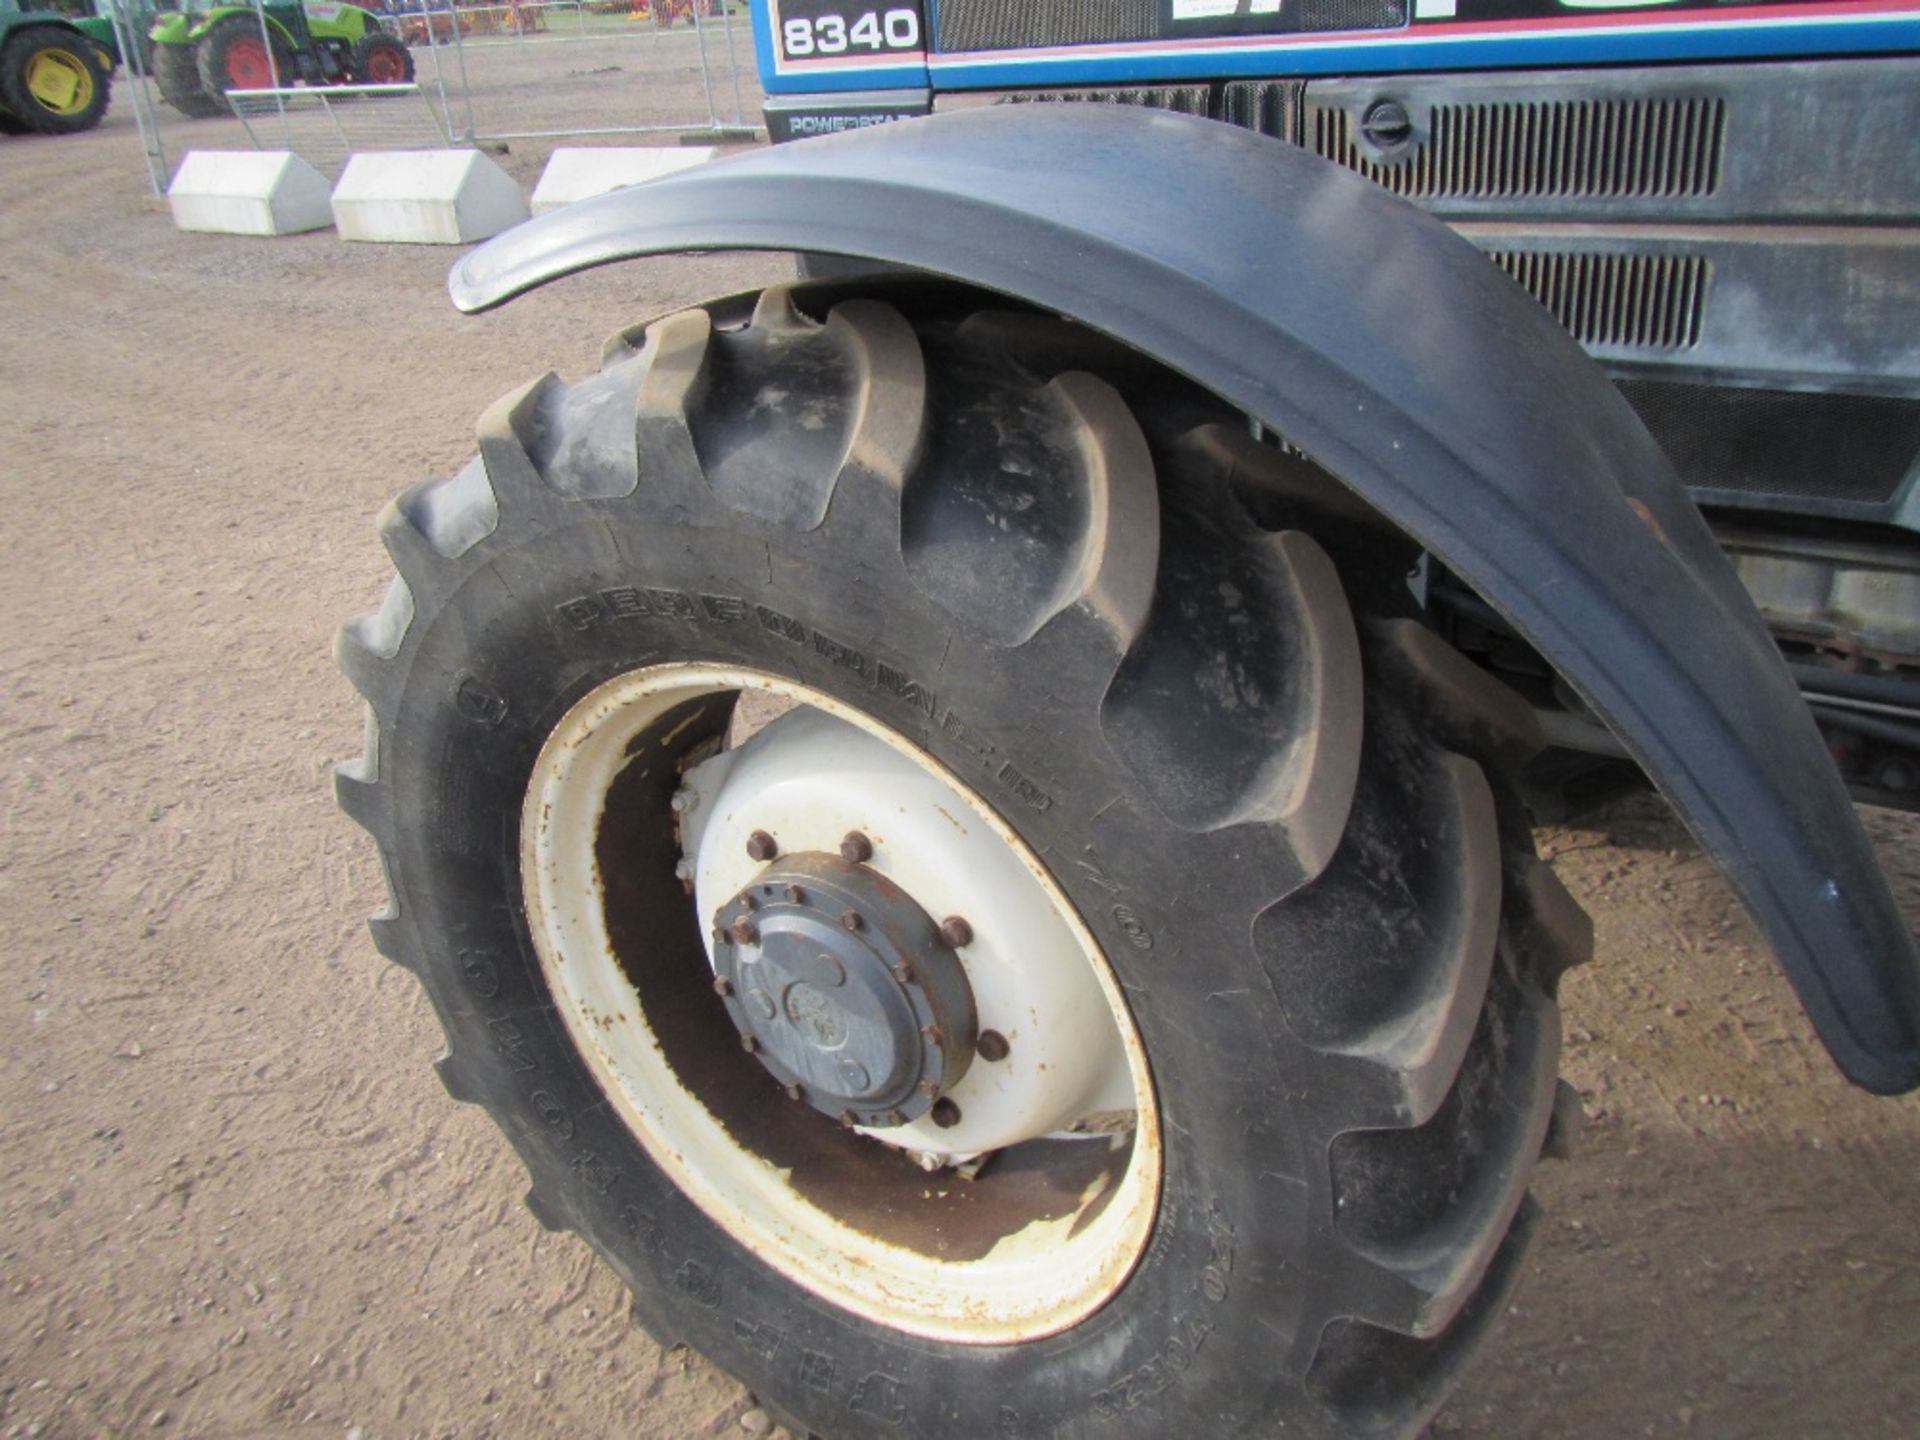 Ford 8340 SLE 4wd Tractor with Front Weights & 520/70x38 Tyres. 1 owner. V5 will be supplied Reg - Image 12 of 18